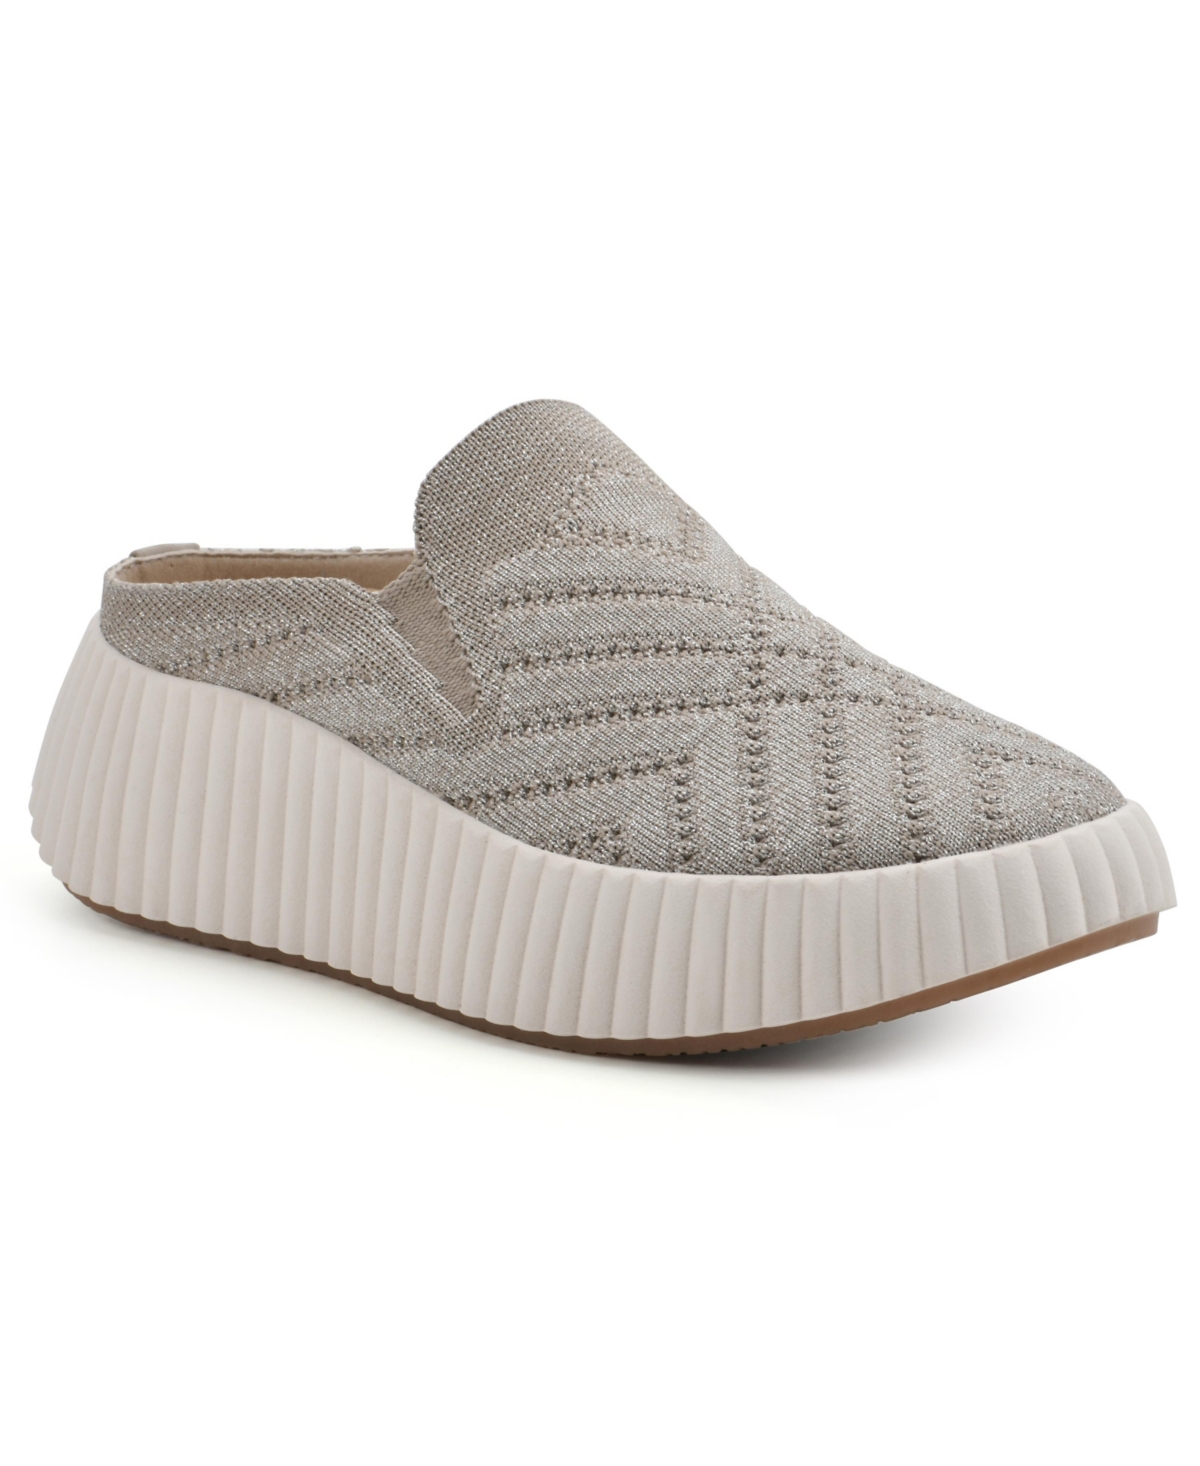 Women's Dystant Slip On Platform Sneakers - Apricot, Fabric